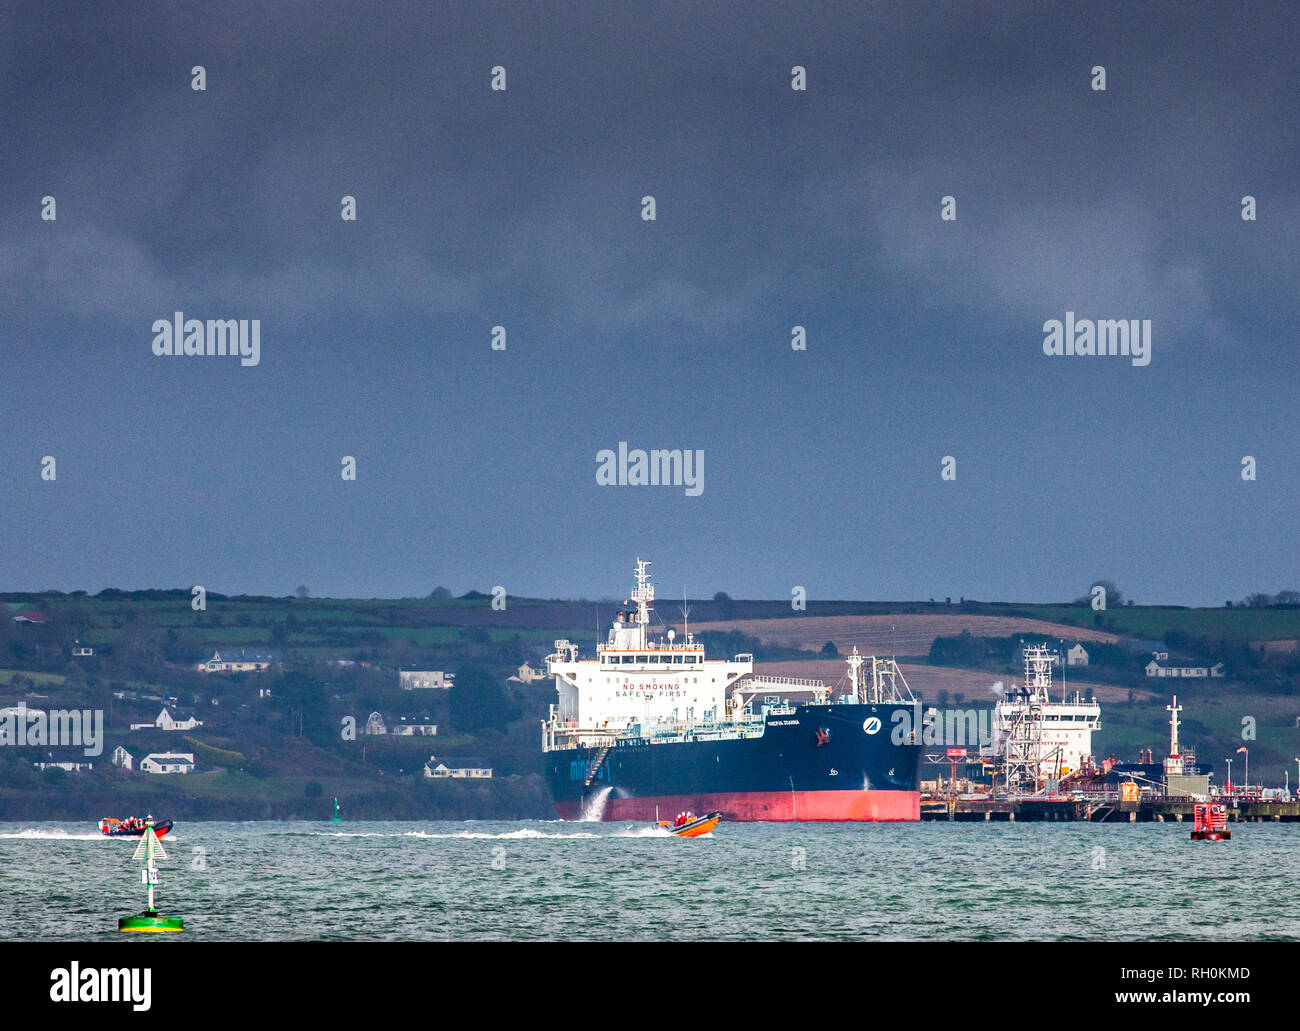 Whitegate, Cork, Ireland. 31st January, 2019. 29295  tonne  tanker Minerva Joanna berthed at the jetty while offloading crude oil at the Irving refinery in Whitegate, Co. Cork, Ireland. Credit: David Creedon/Alamy Live News Stock Photo